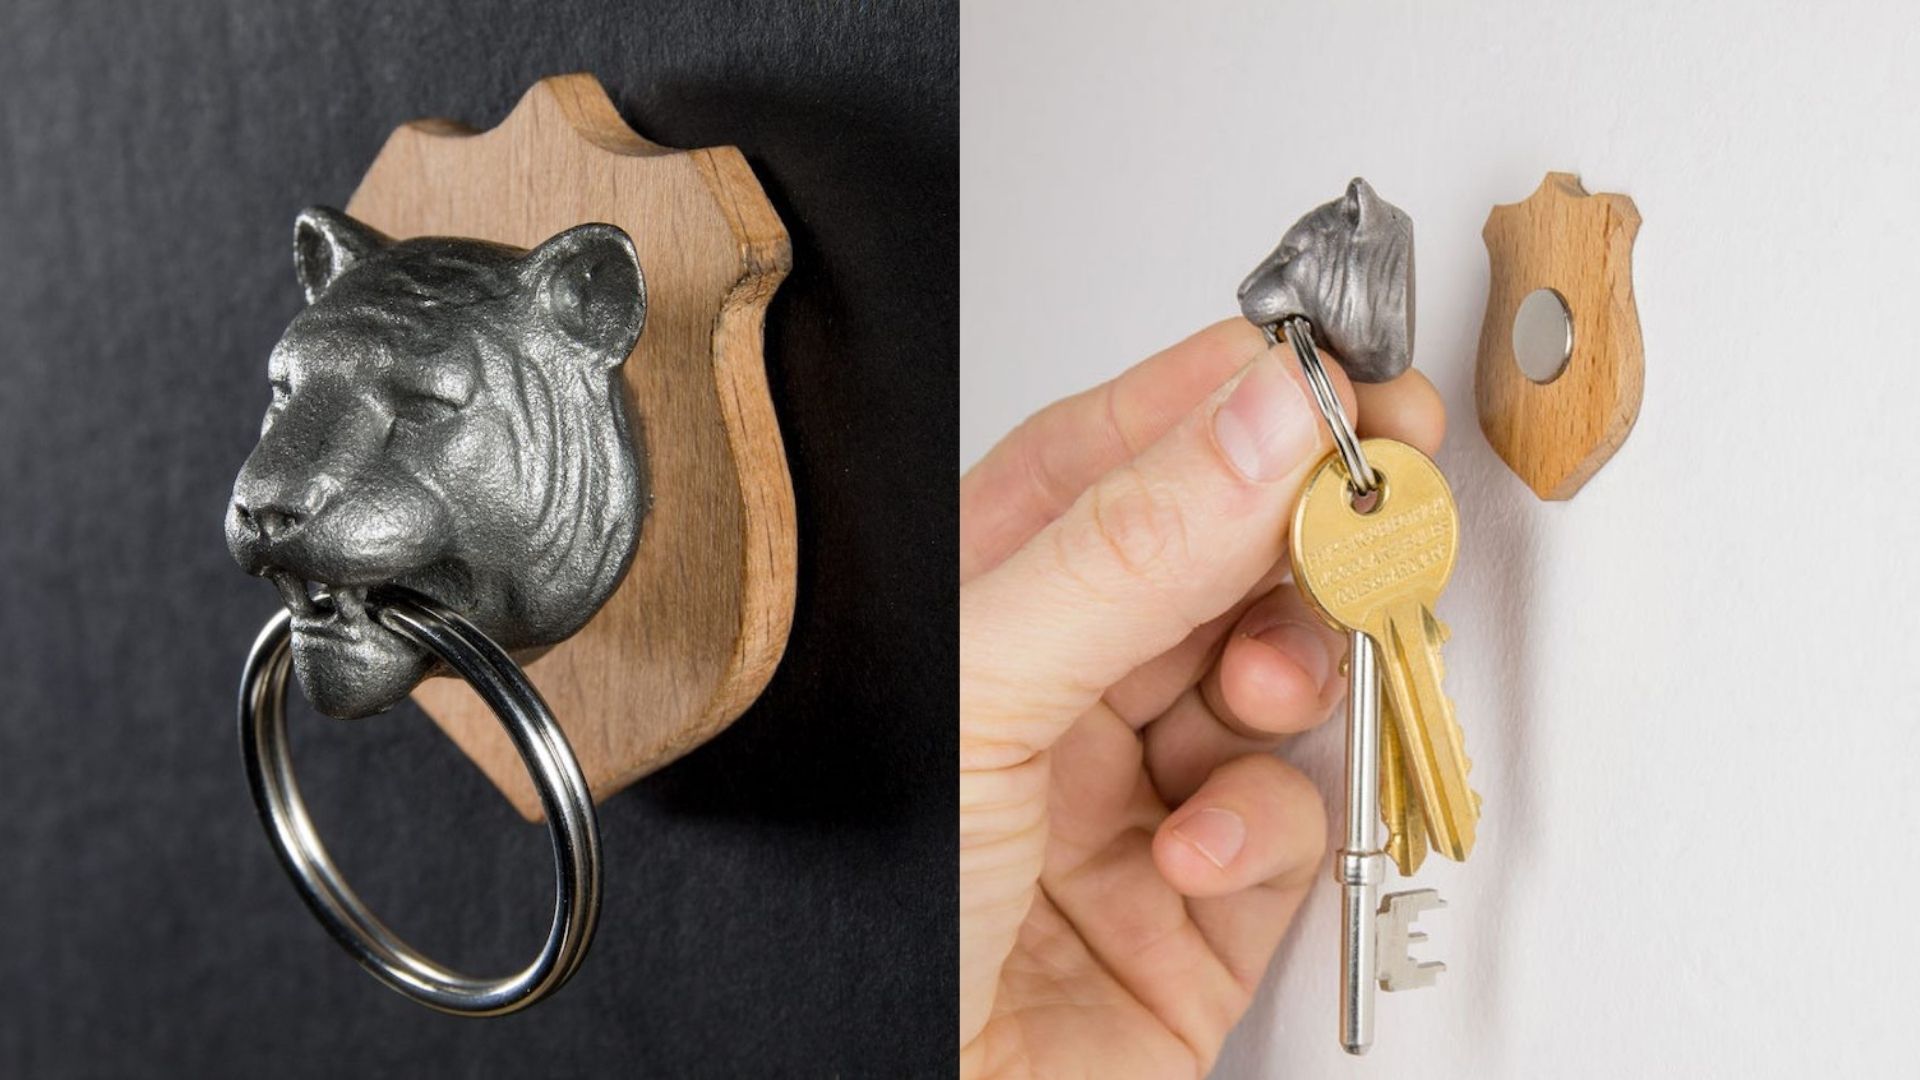 On the left is a small metal tiger’s head on a wooden plaque on a wall, with a key ring in its mouth. On the right is a hand going to place the same metal tiger’s head with keys in its mouth onto the plaque, with a magnet in the middle of the plaque.